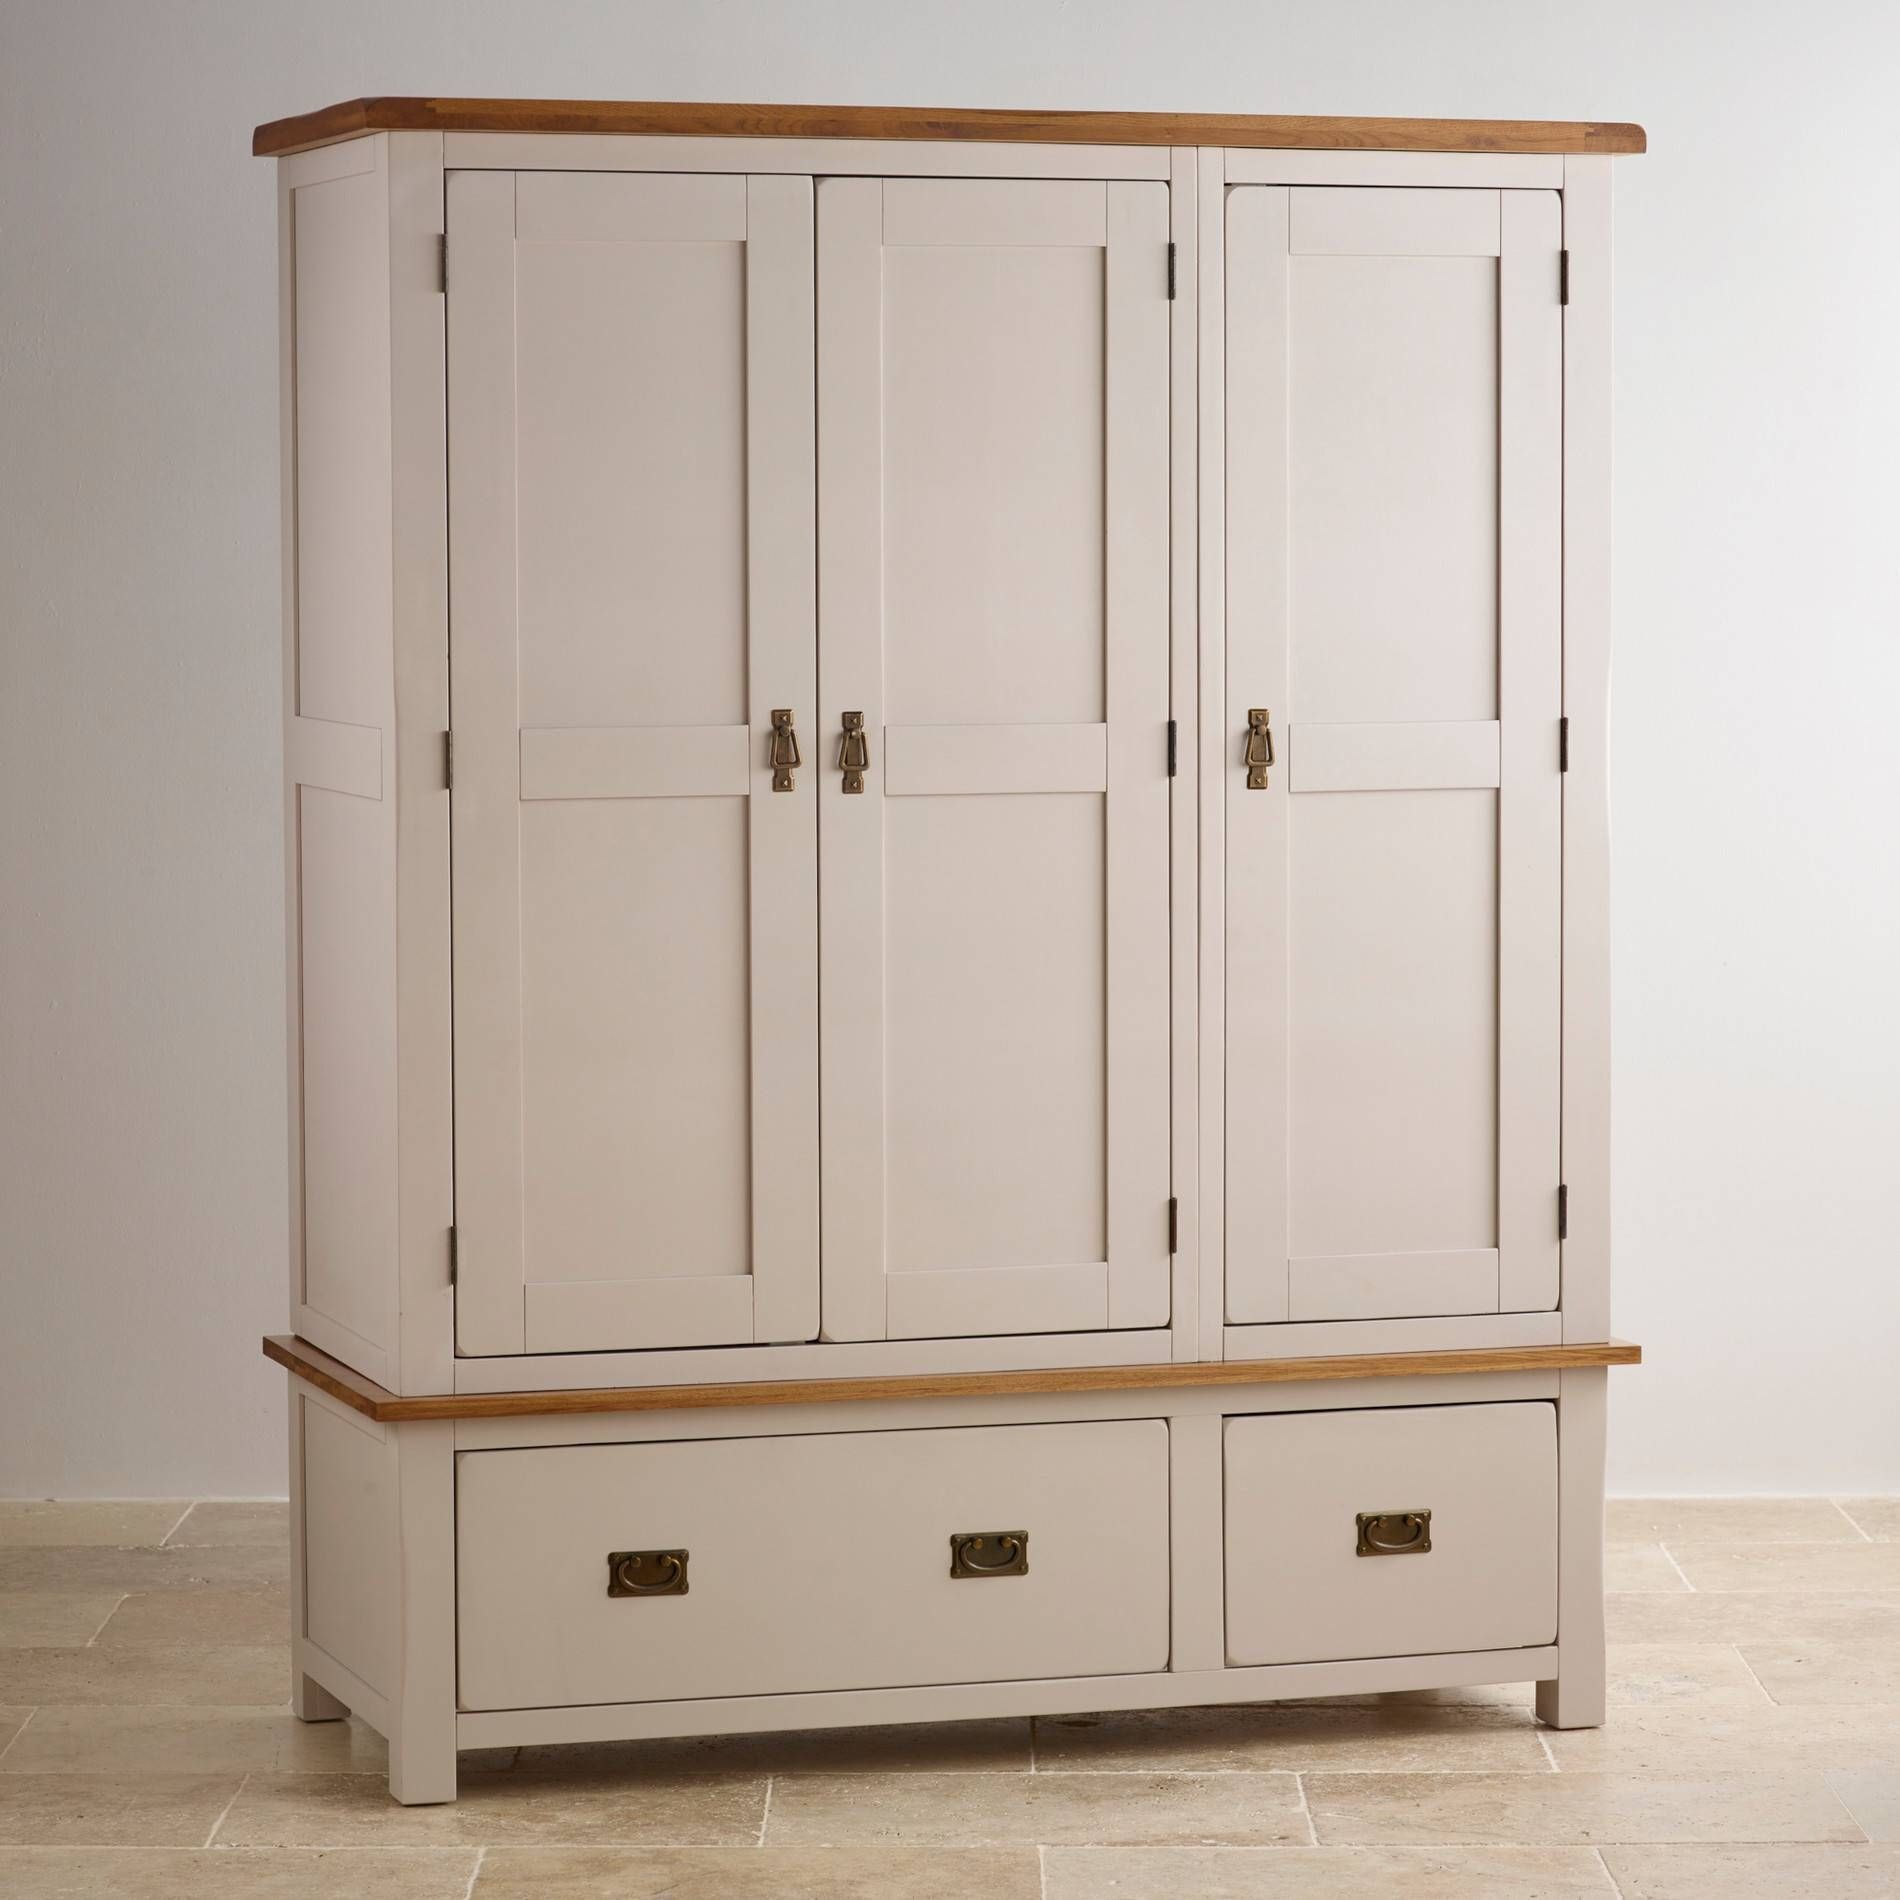 Kemble Triple Wardrobe In Painted Oak | Oak Furniture Land With Regard To Triple Wardrobes With Drawers (View 12 of 15)